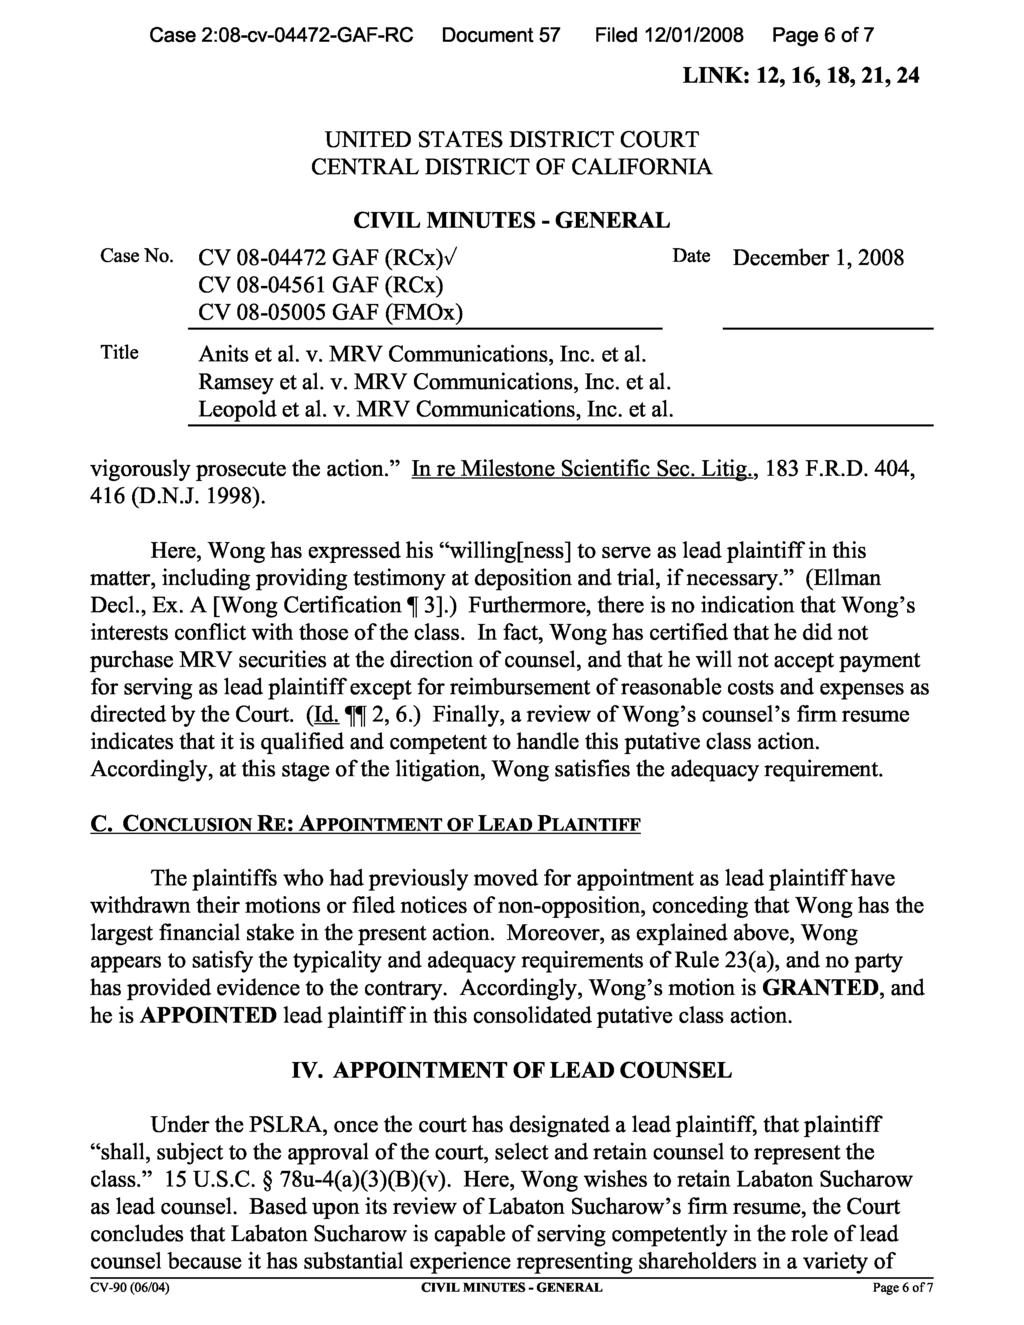 Case 2:08-cv-04472-GAF-RC Document 57 Filed 12/01/2008 Page 6 of 7 vigorously prosecute the action. In re Milestone Scientific Sec. Litig., 183 F.R.D. 404, 416 (D.N.J. 1998).